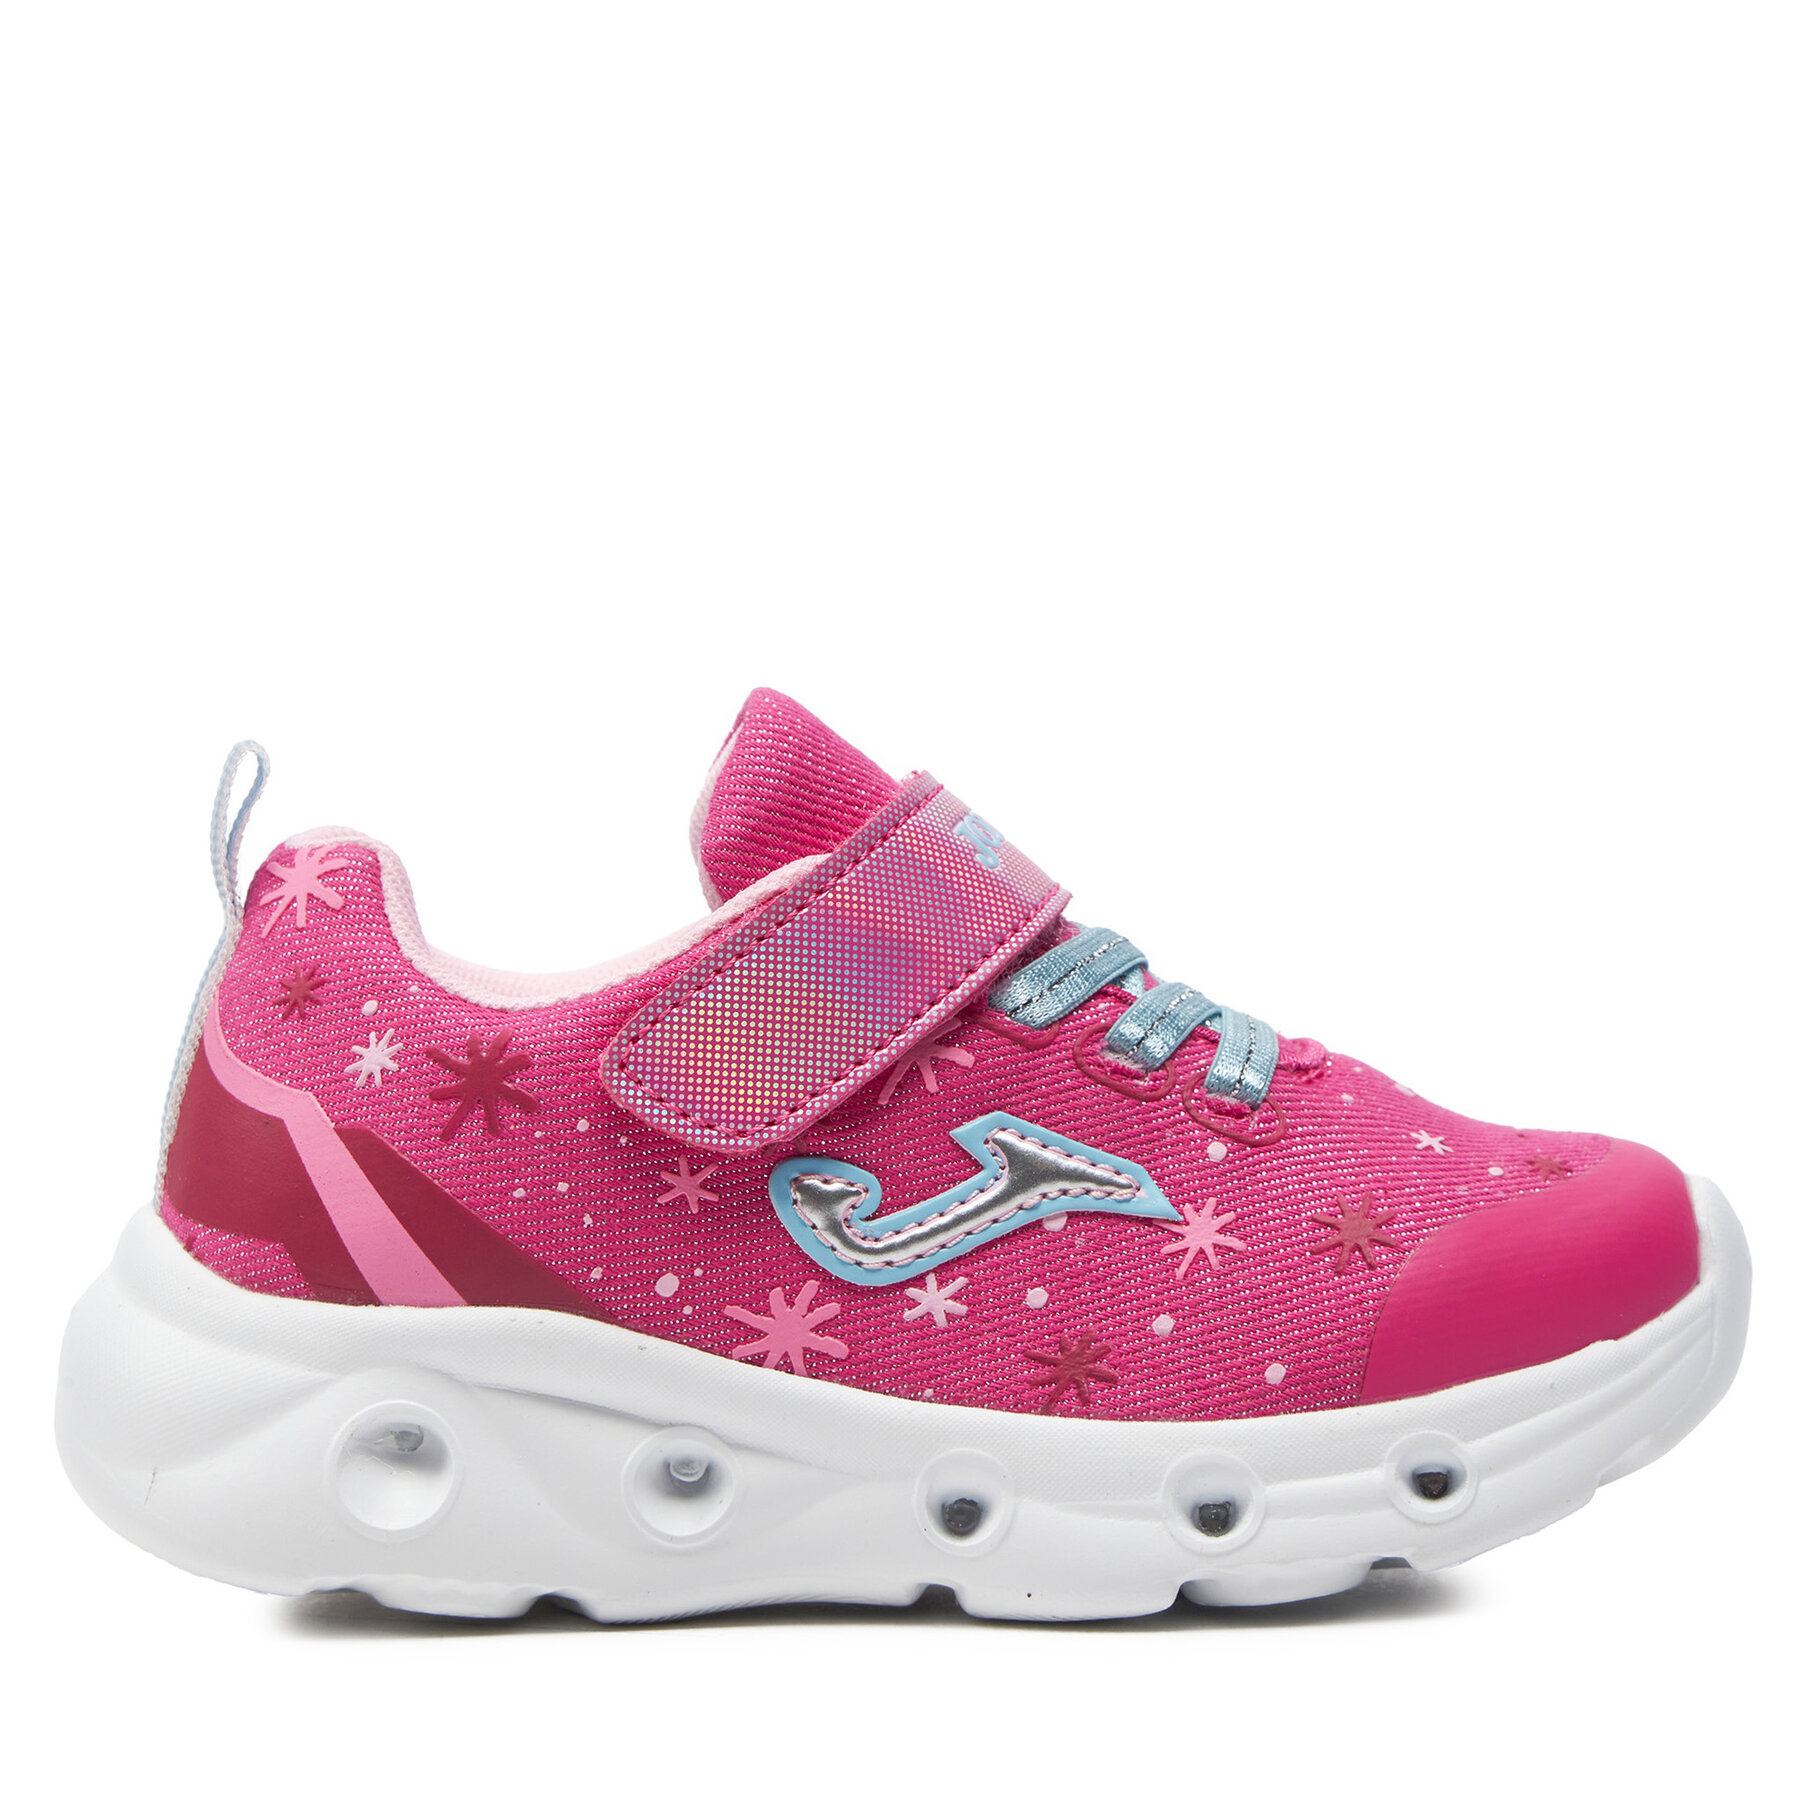 Sneakers Joma Space Jr 2413 JSPACS2413V Pink von Joma